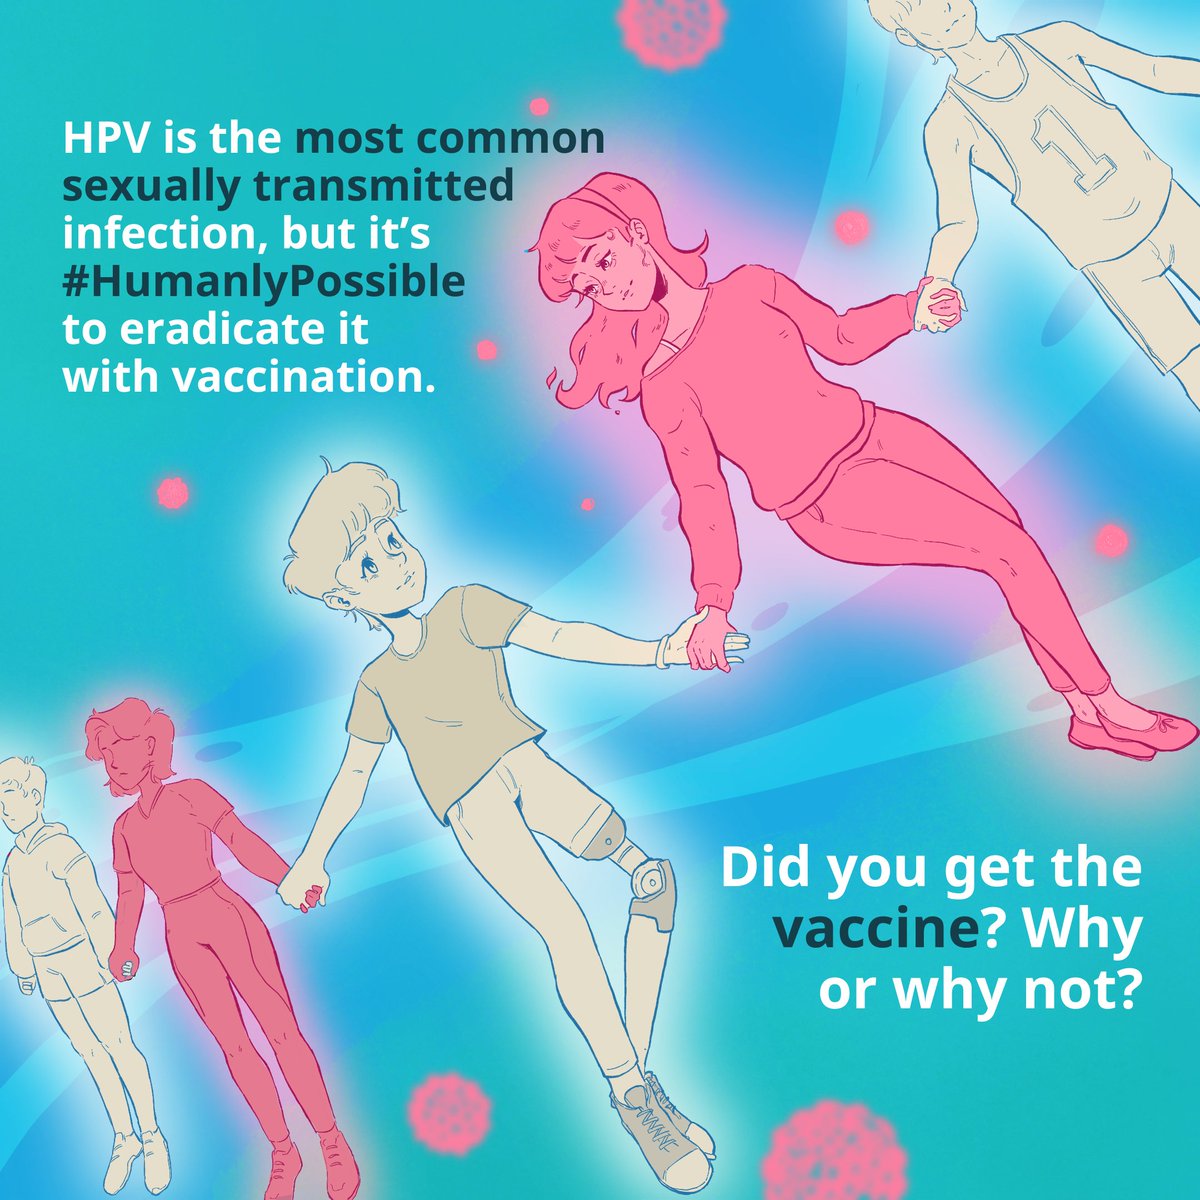 HPV afflicts hundreds of thousands of girls and women worldwide. This #WorldImmunizationWeek, send “HPV” in a message to U-Report on these platforms to share your thoughts in a safe space. Facebook: bit.ly/HPV-FB Instagram: bit.ly/HPV-IG #HumanlyPossible